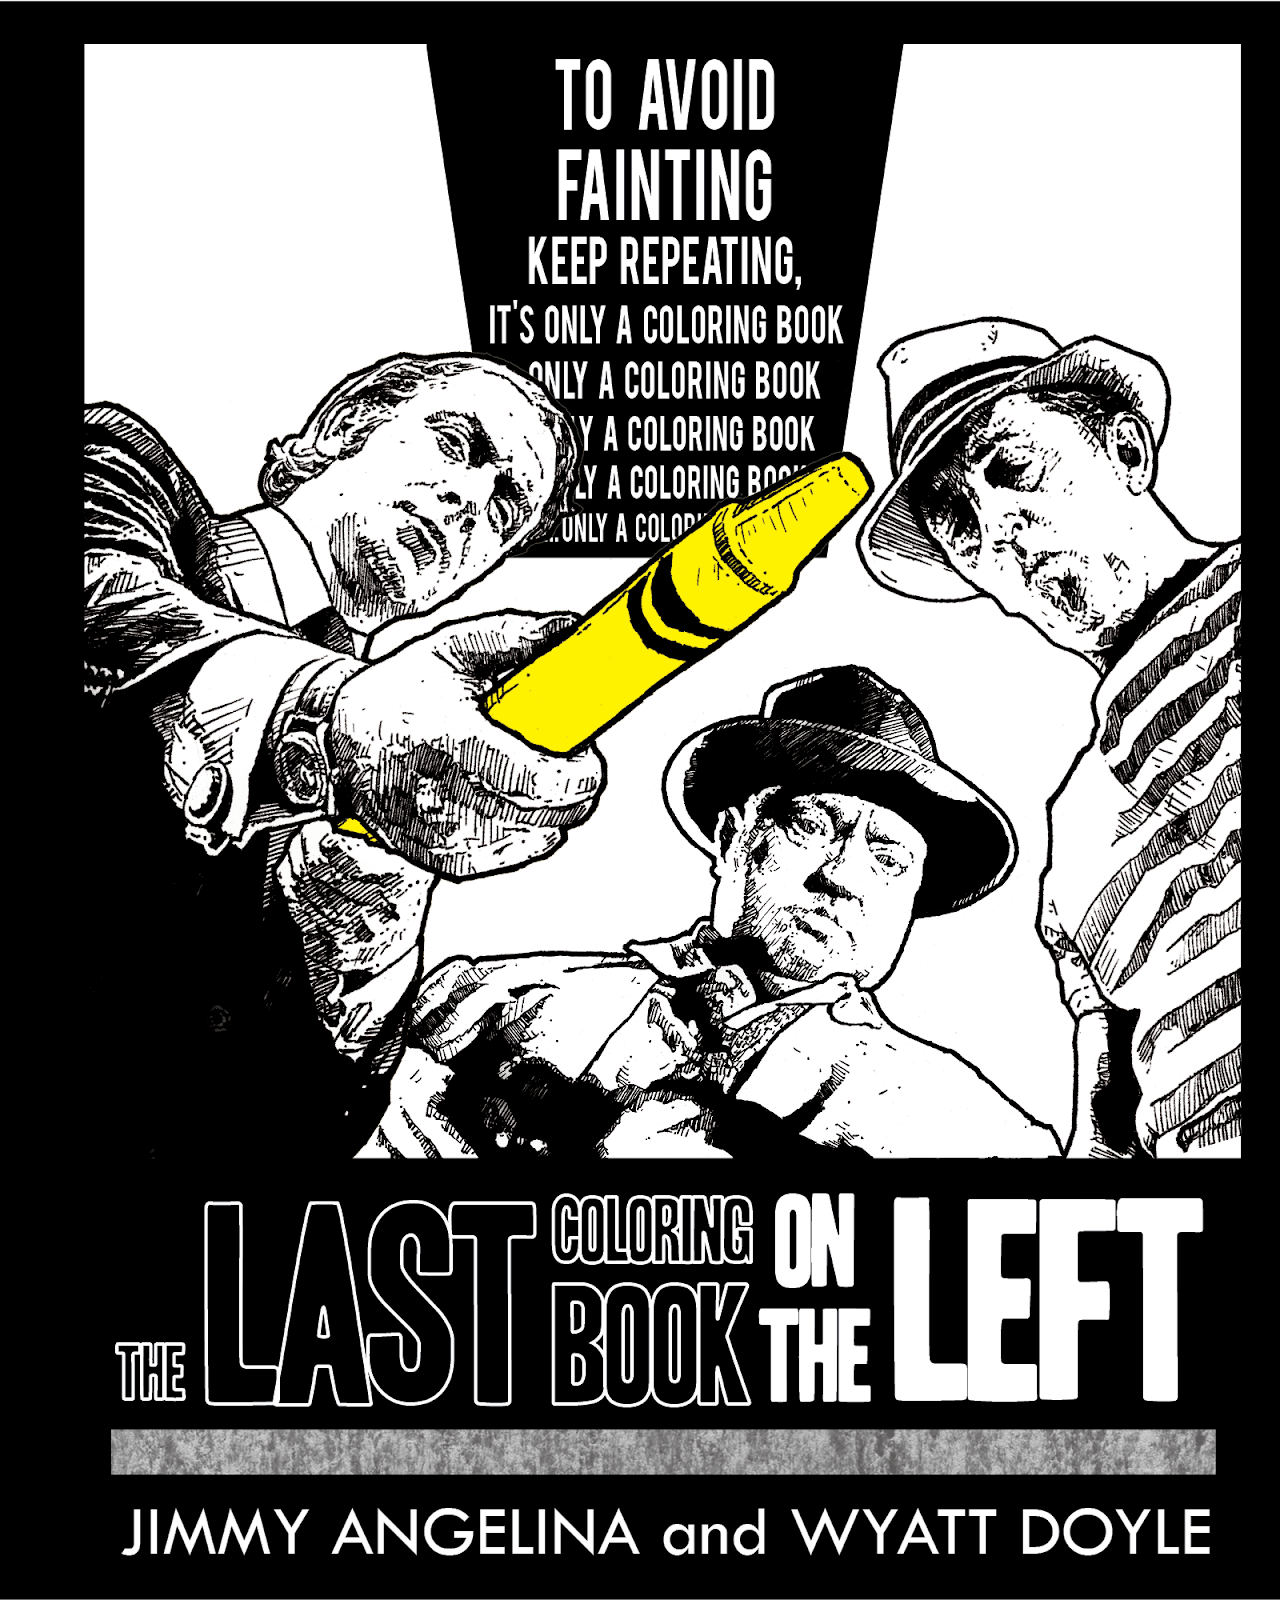 THE LAST COLORING BOOK ON THE LEFT / Jimmy Angelina and Wyatt Doyle